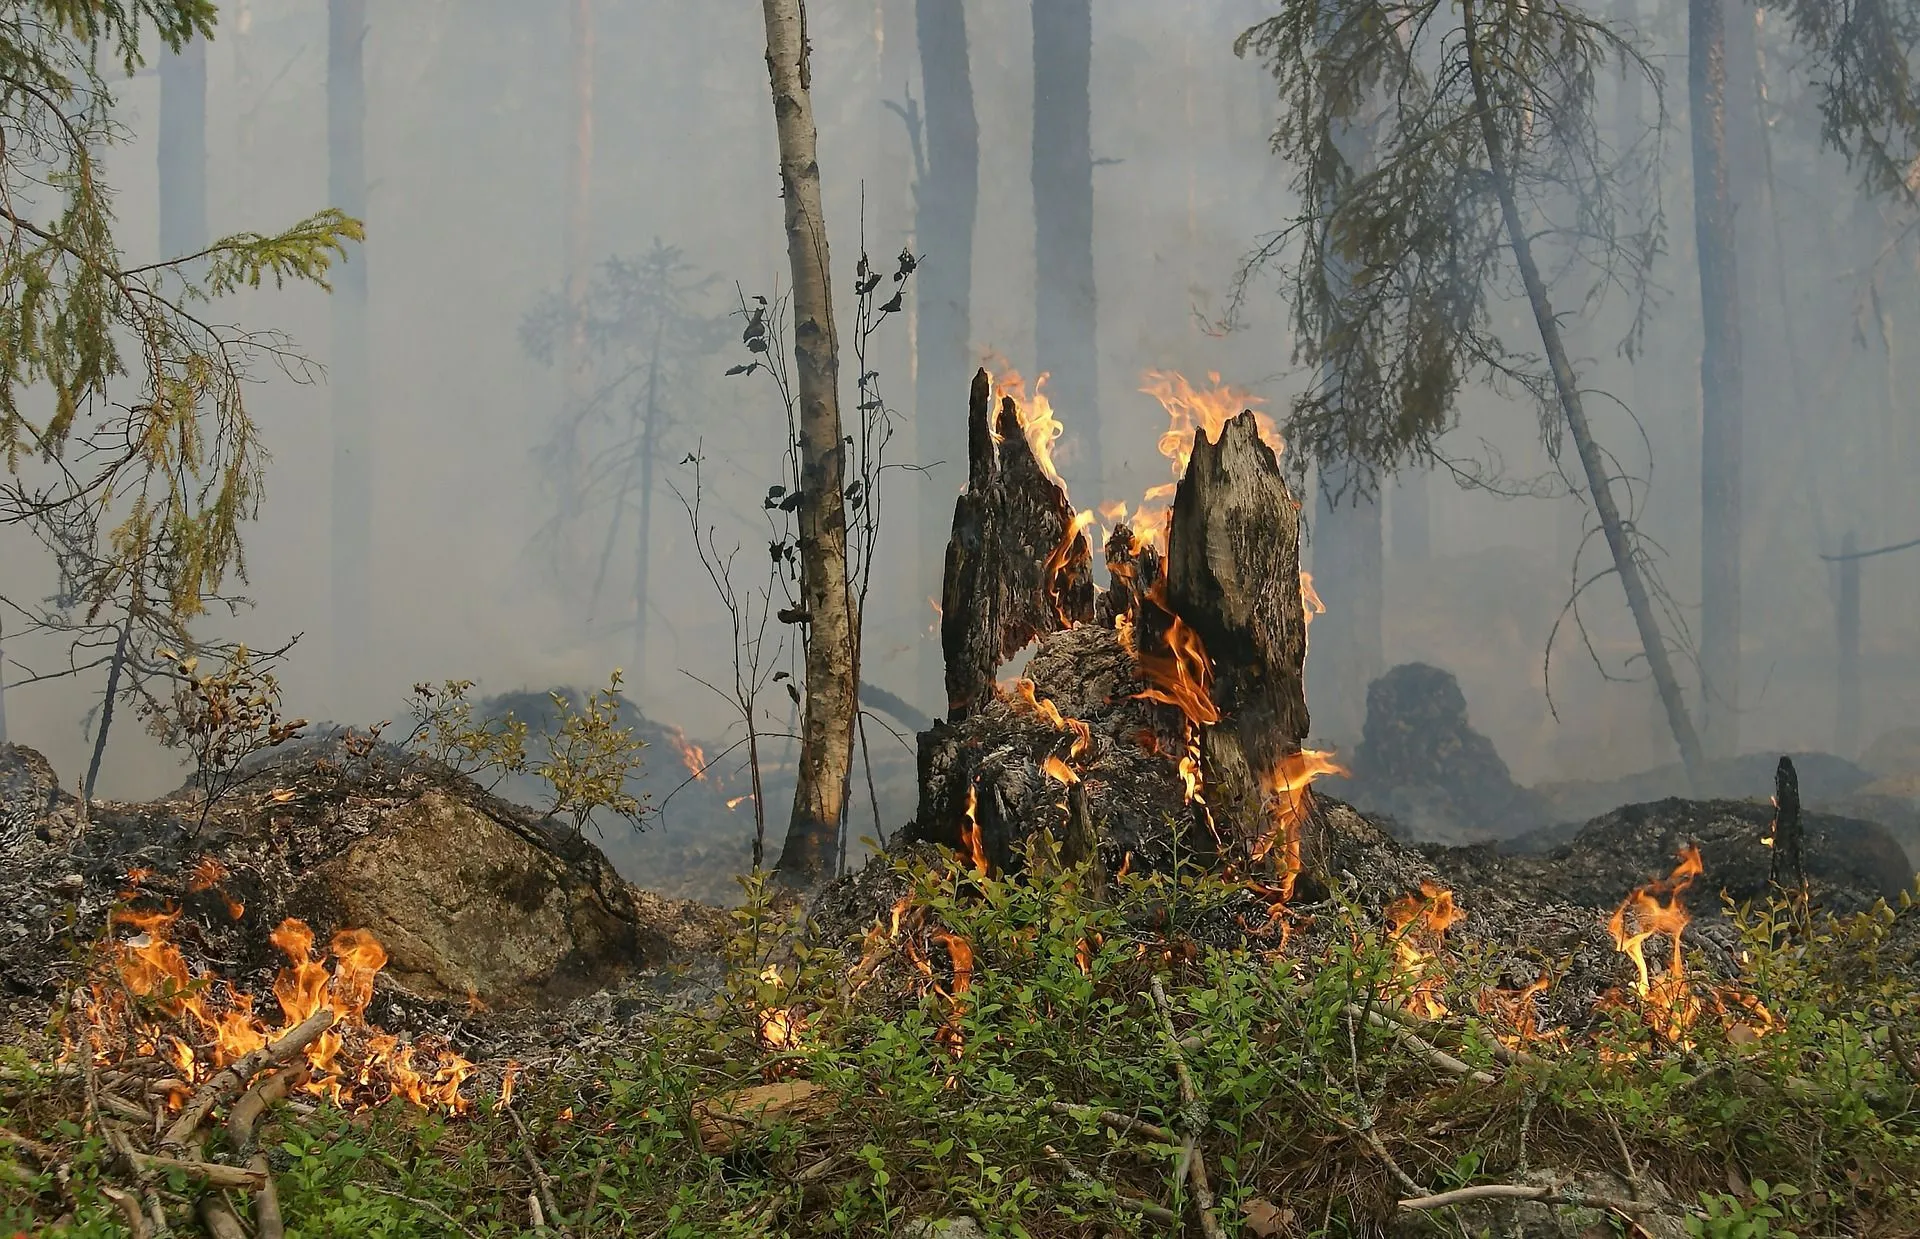 Muck fires can turn into forest fires when left uncontrolled.